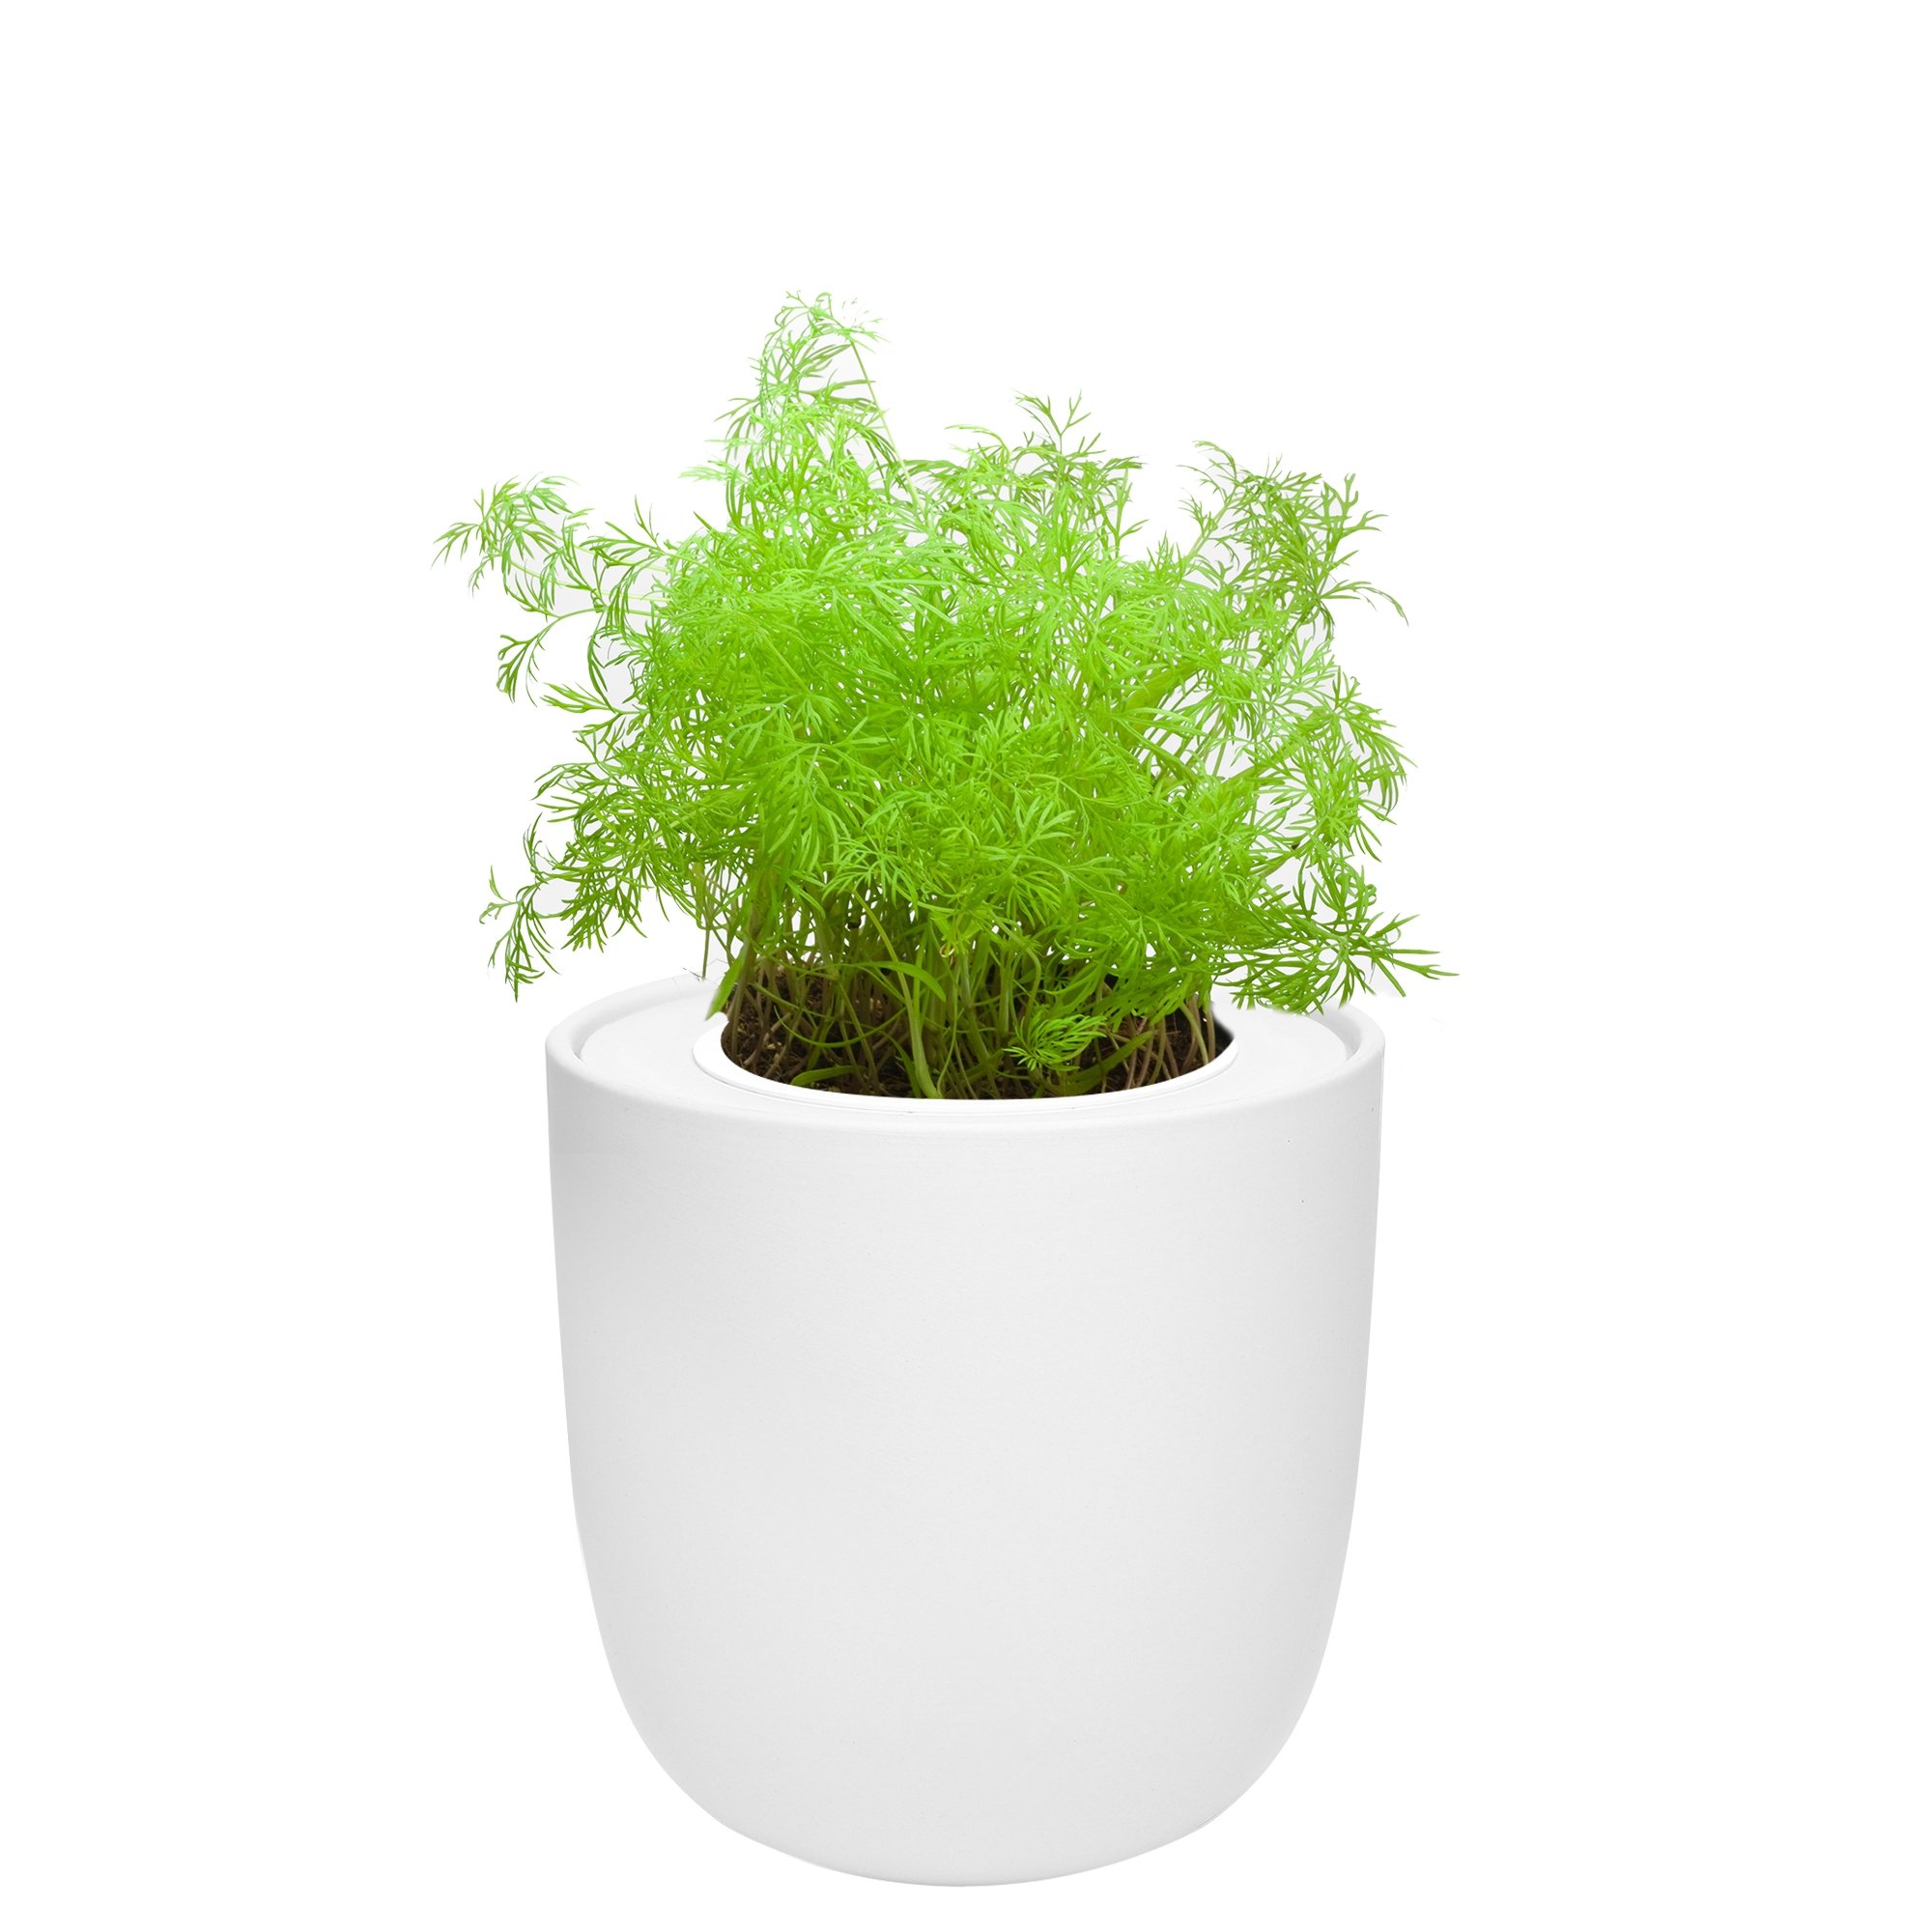 Hydroponic Herb Growing Kit with White Ceramic Pot and Seeds (Dill)